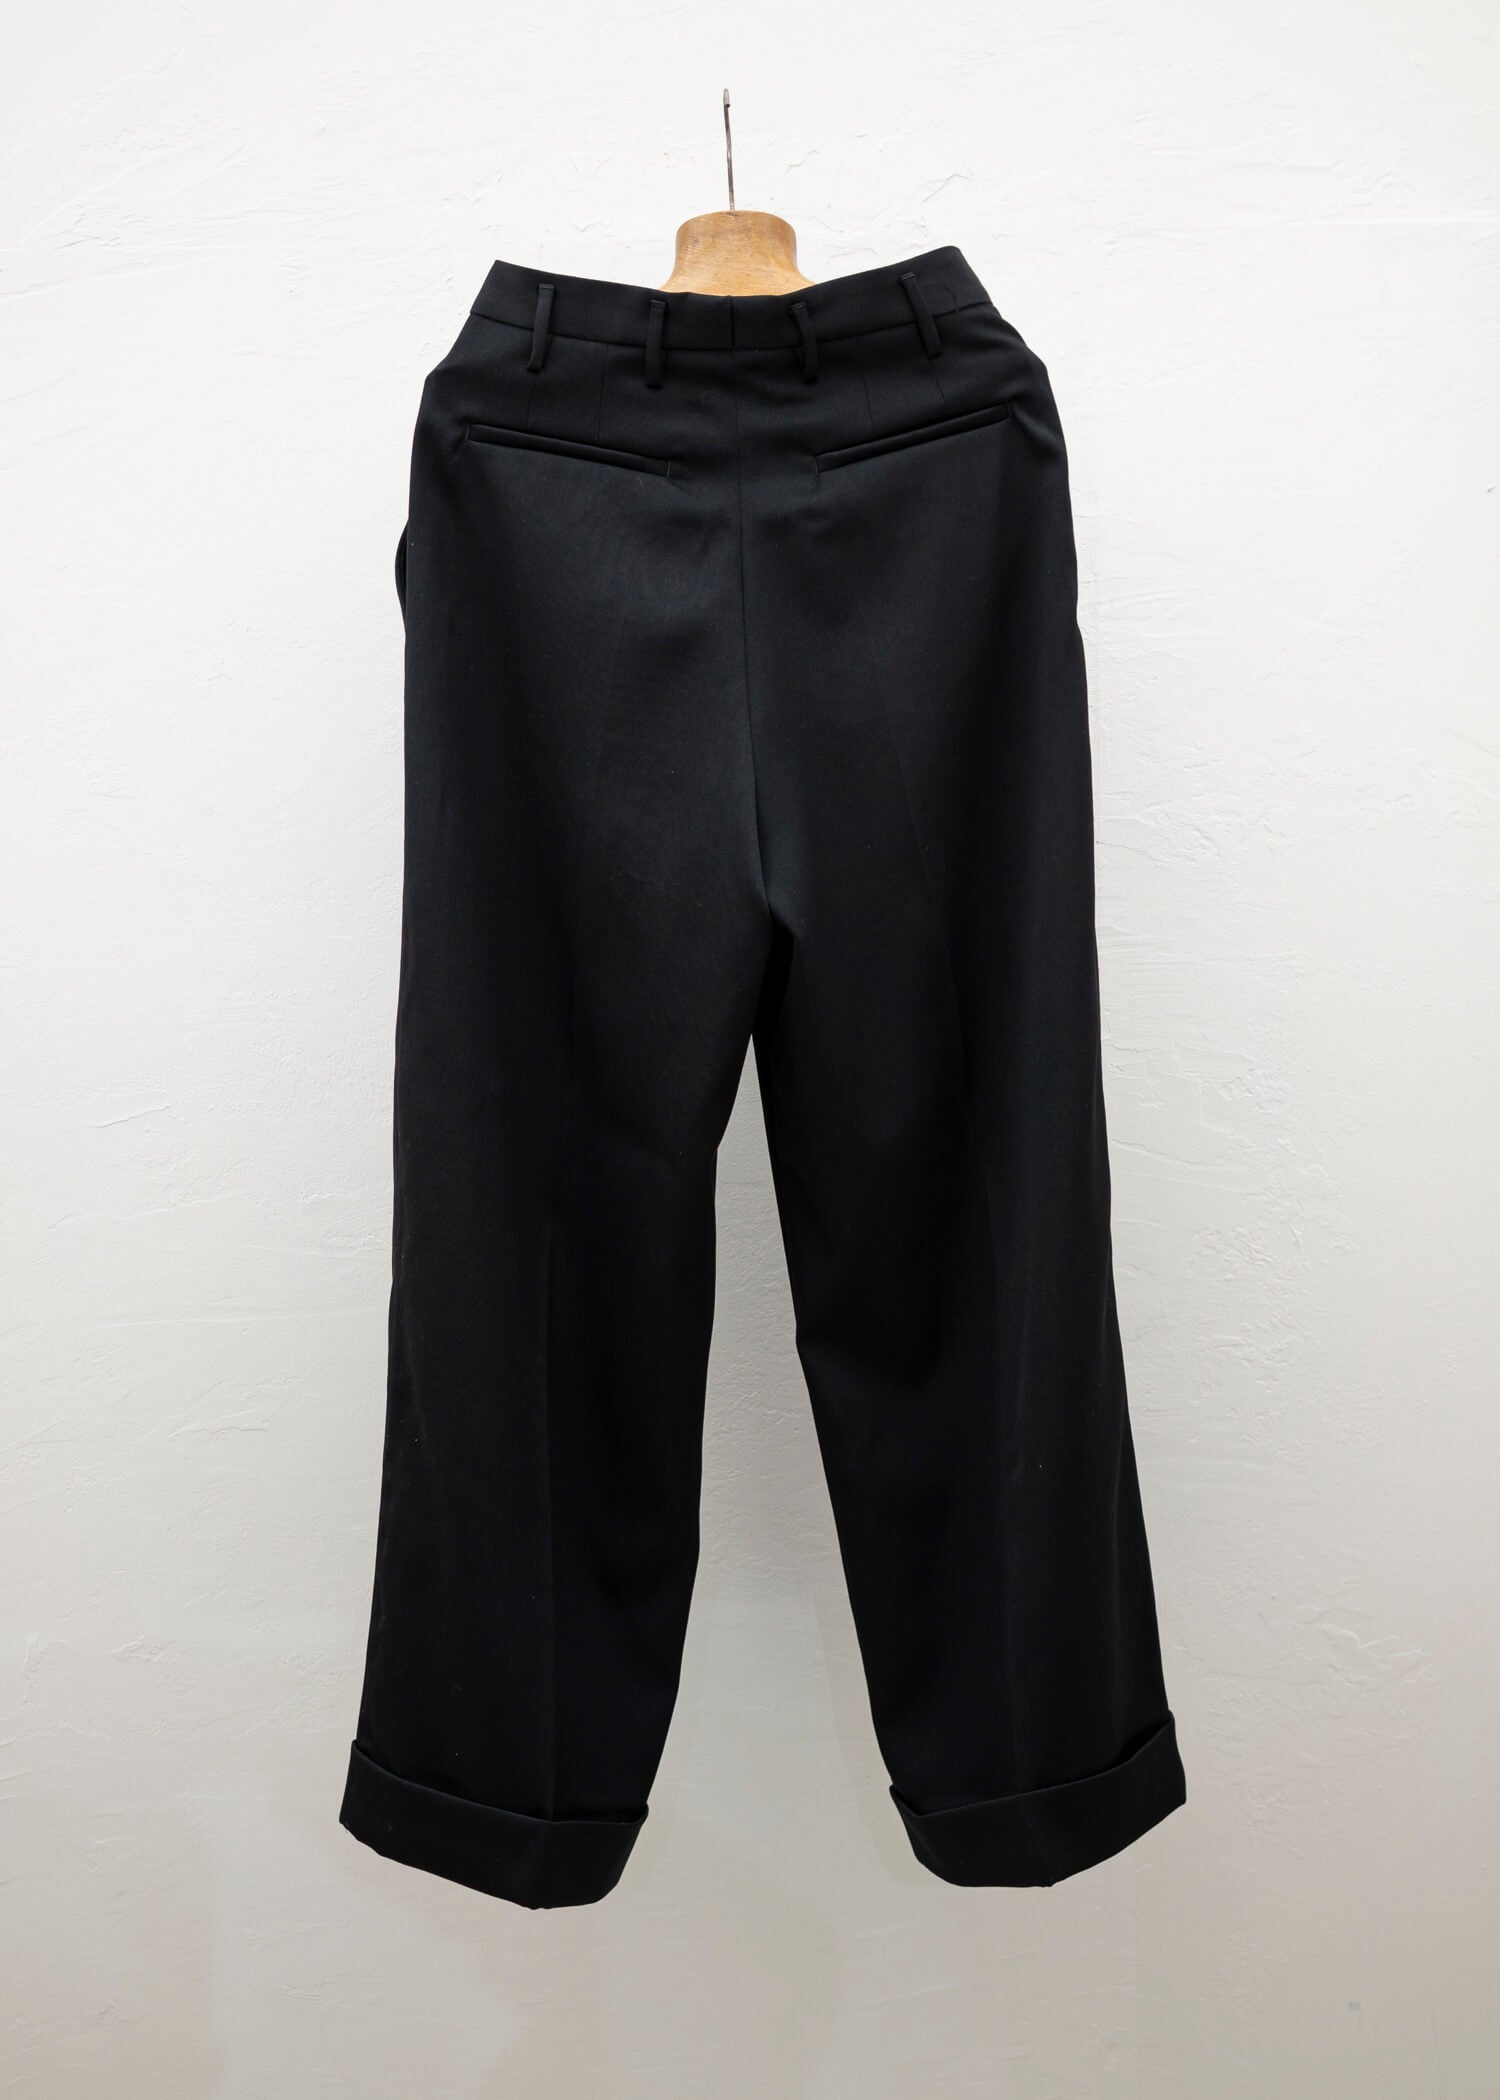 HED MAYNER ELONGATED CUFFED TROUSERS BLACK